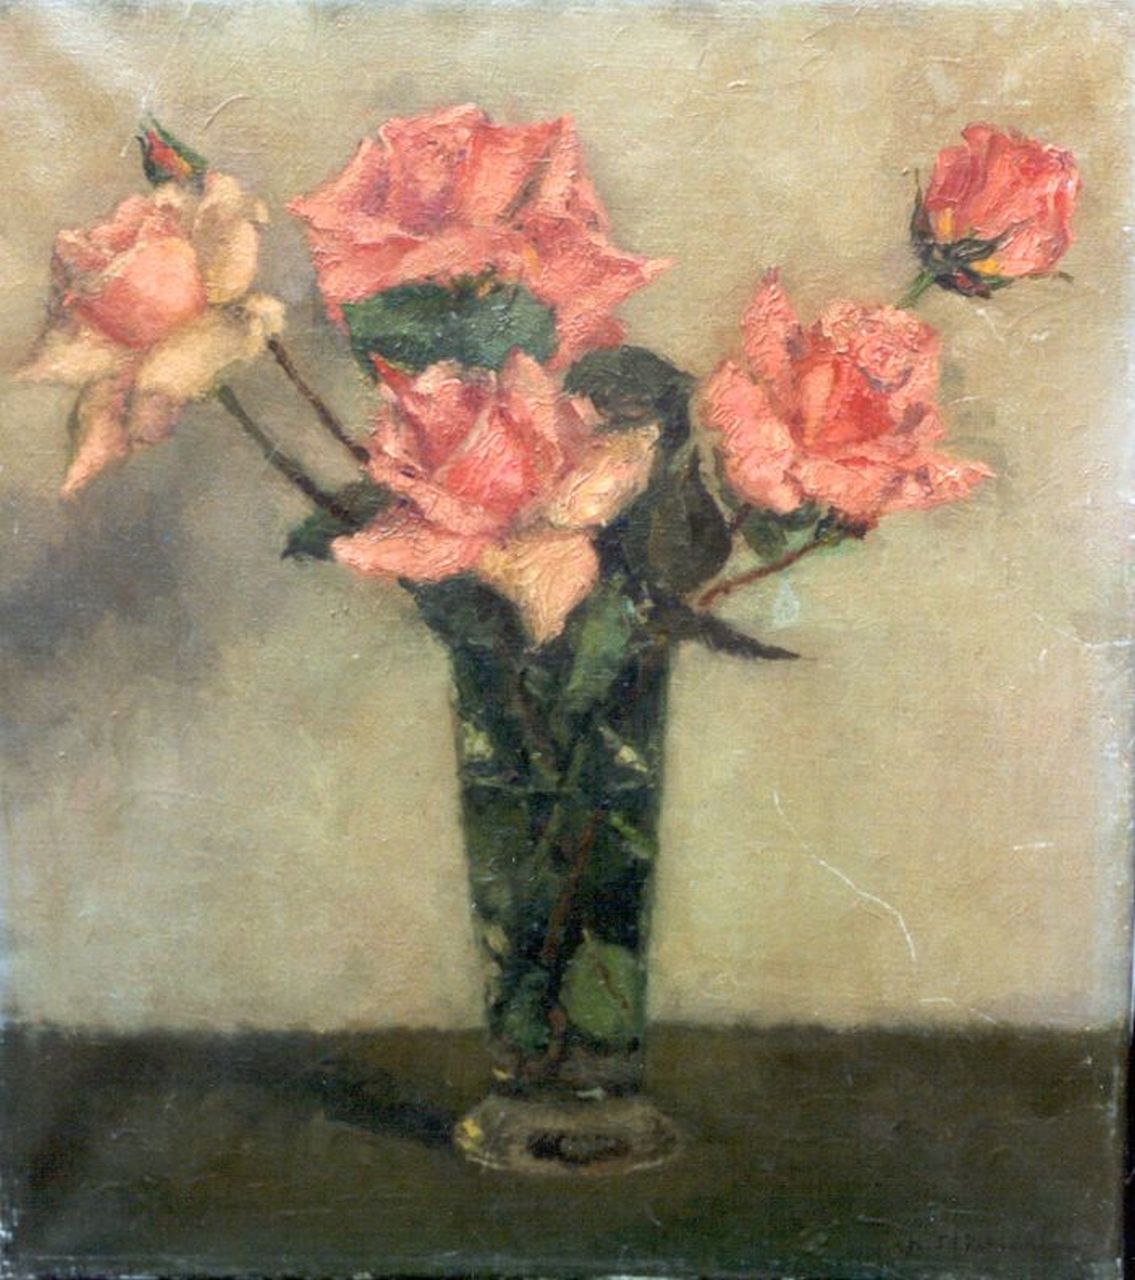 Timmering C.M.  | Cornelis Herman 'Cees' Timmering, Pink roses in a vase, oil on canvas 40.0 x 35.0 cm, signed l.r.